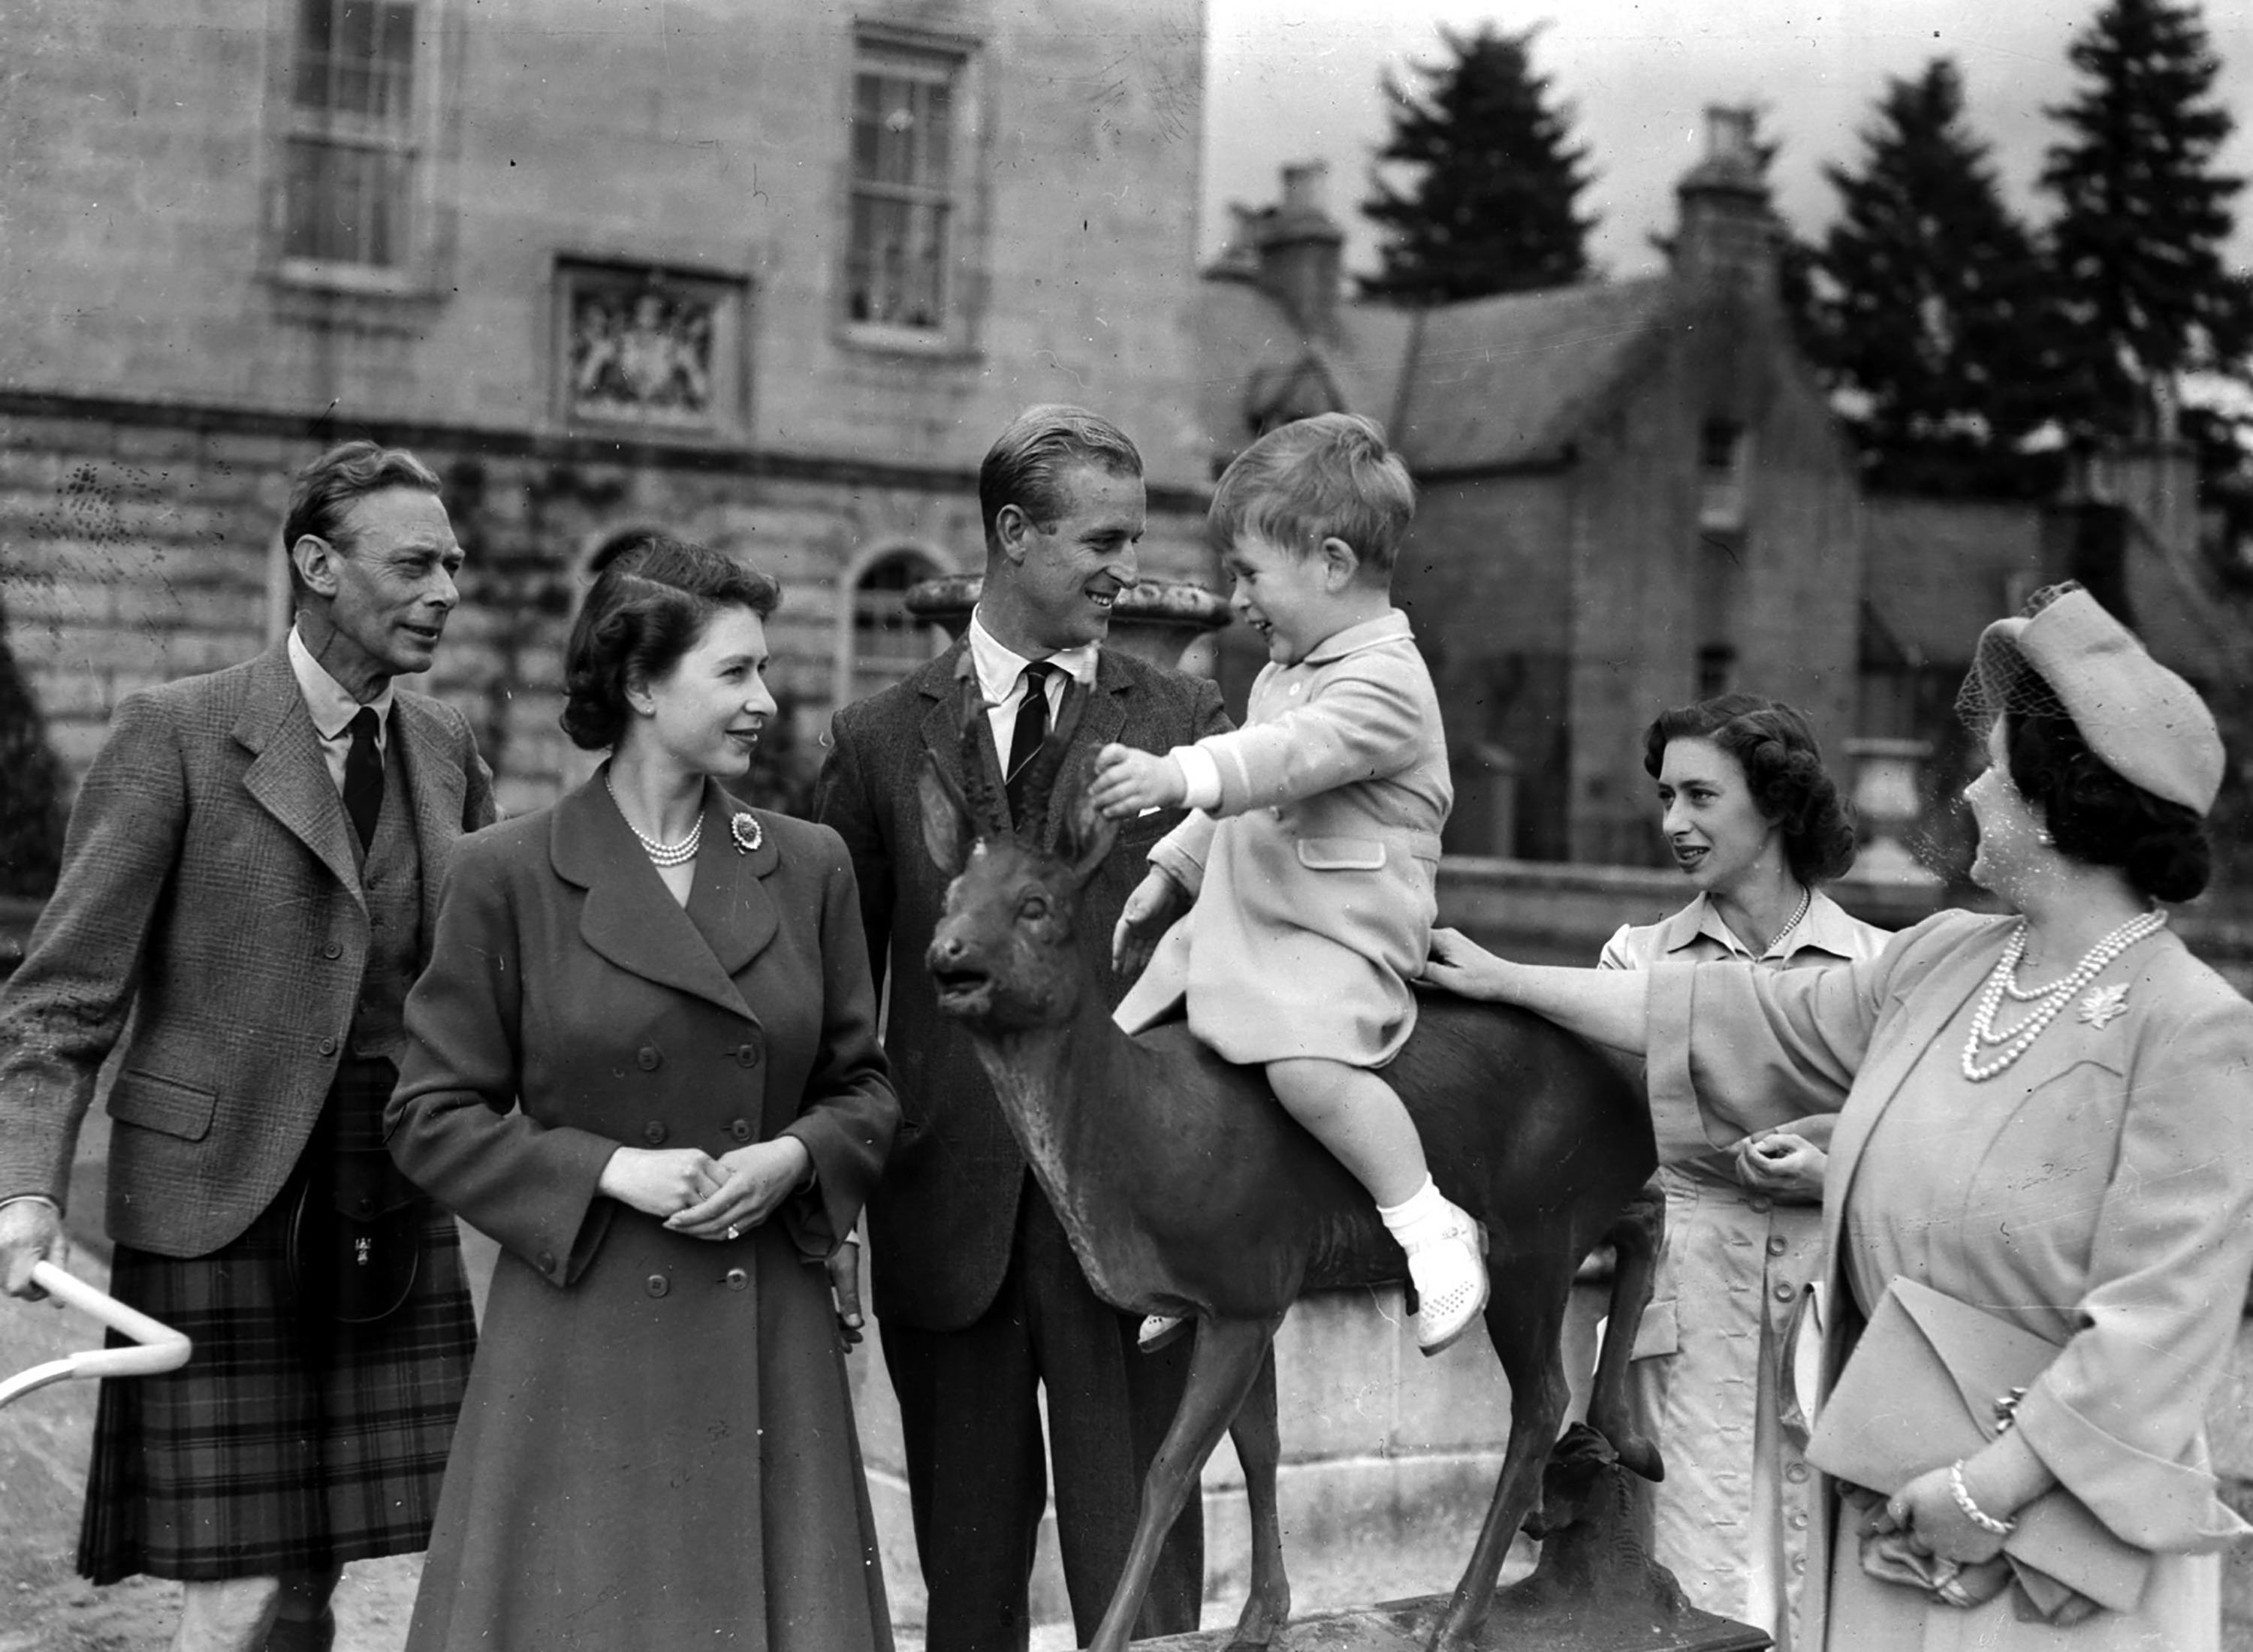 Prince Charles (C-R), watched by King George VI (L), Princess Elizabeth (C-L), Prince Philip (C), Princess Margaret and Queen Elizabeth (R), sits on a sculpture of a deer in the grounds of Balmoral Castle, Scotland, Aug. 1951. (AP Photo)